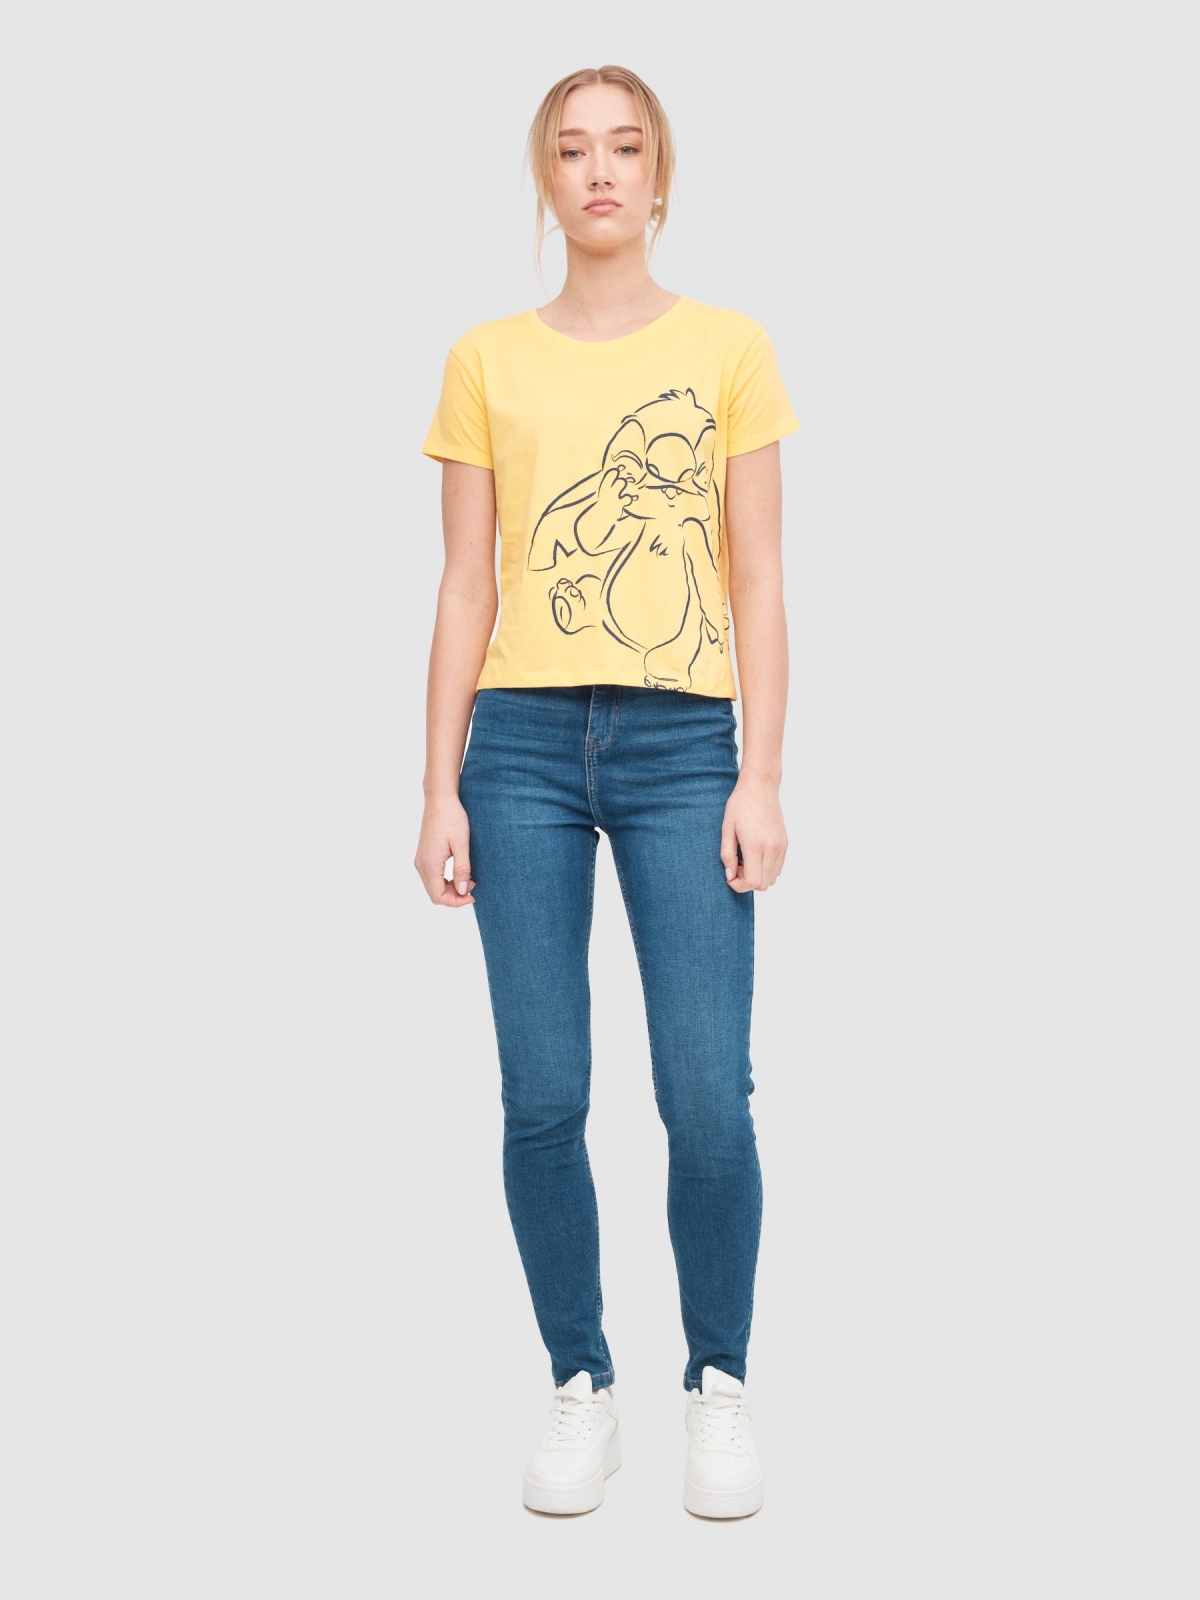 Licensed Stitch T-shirt yellow front view